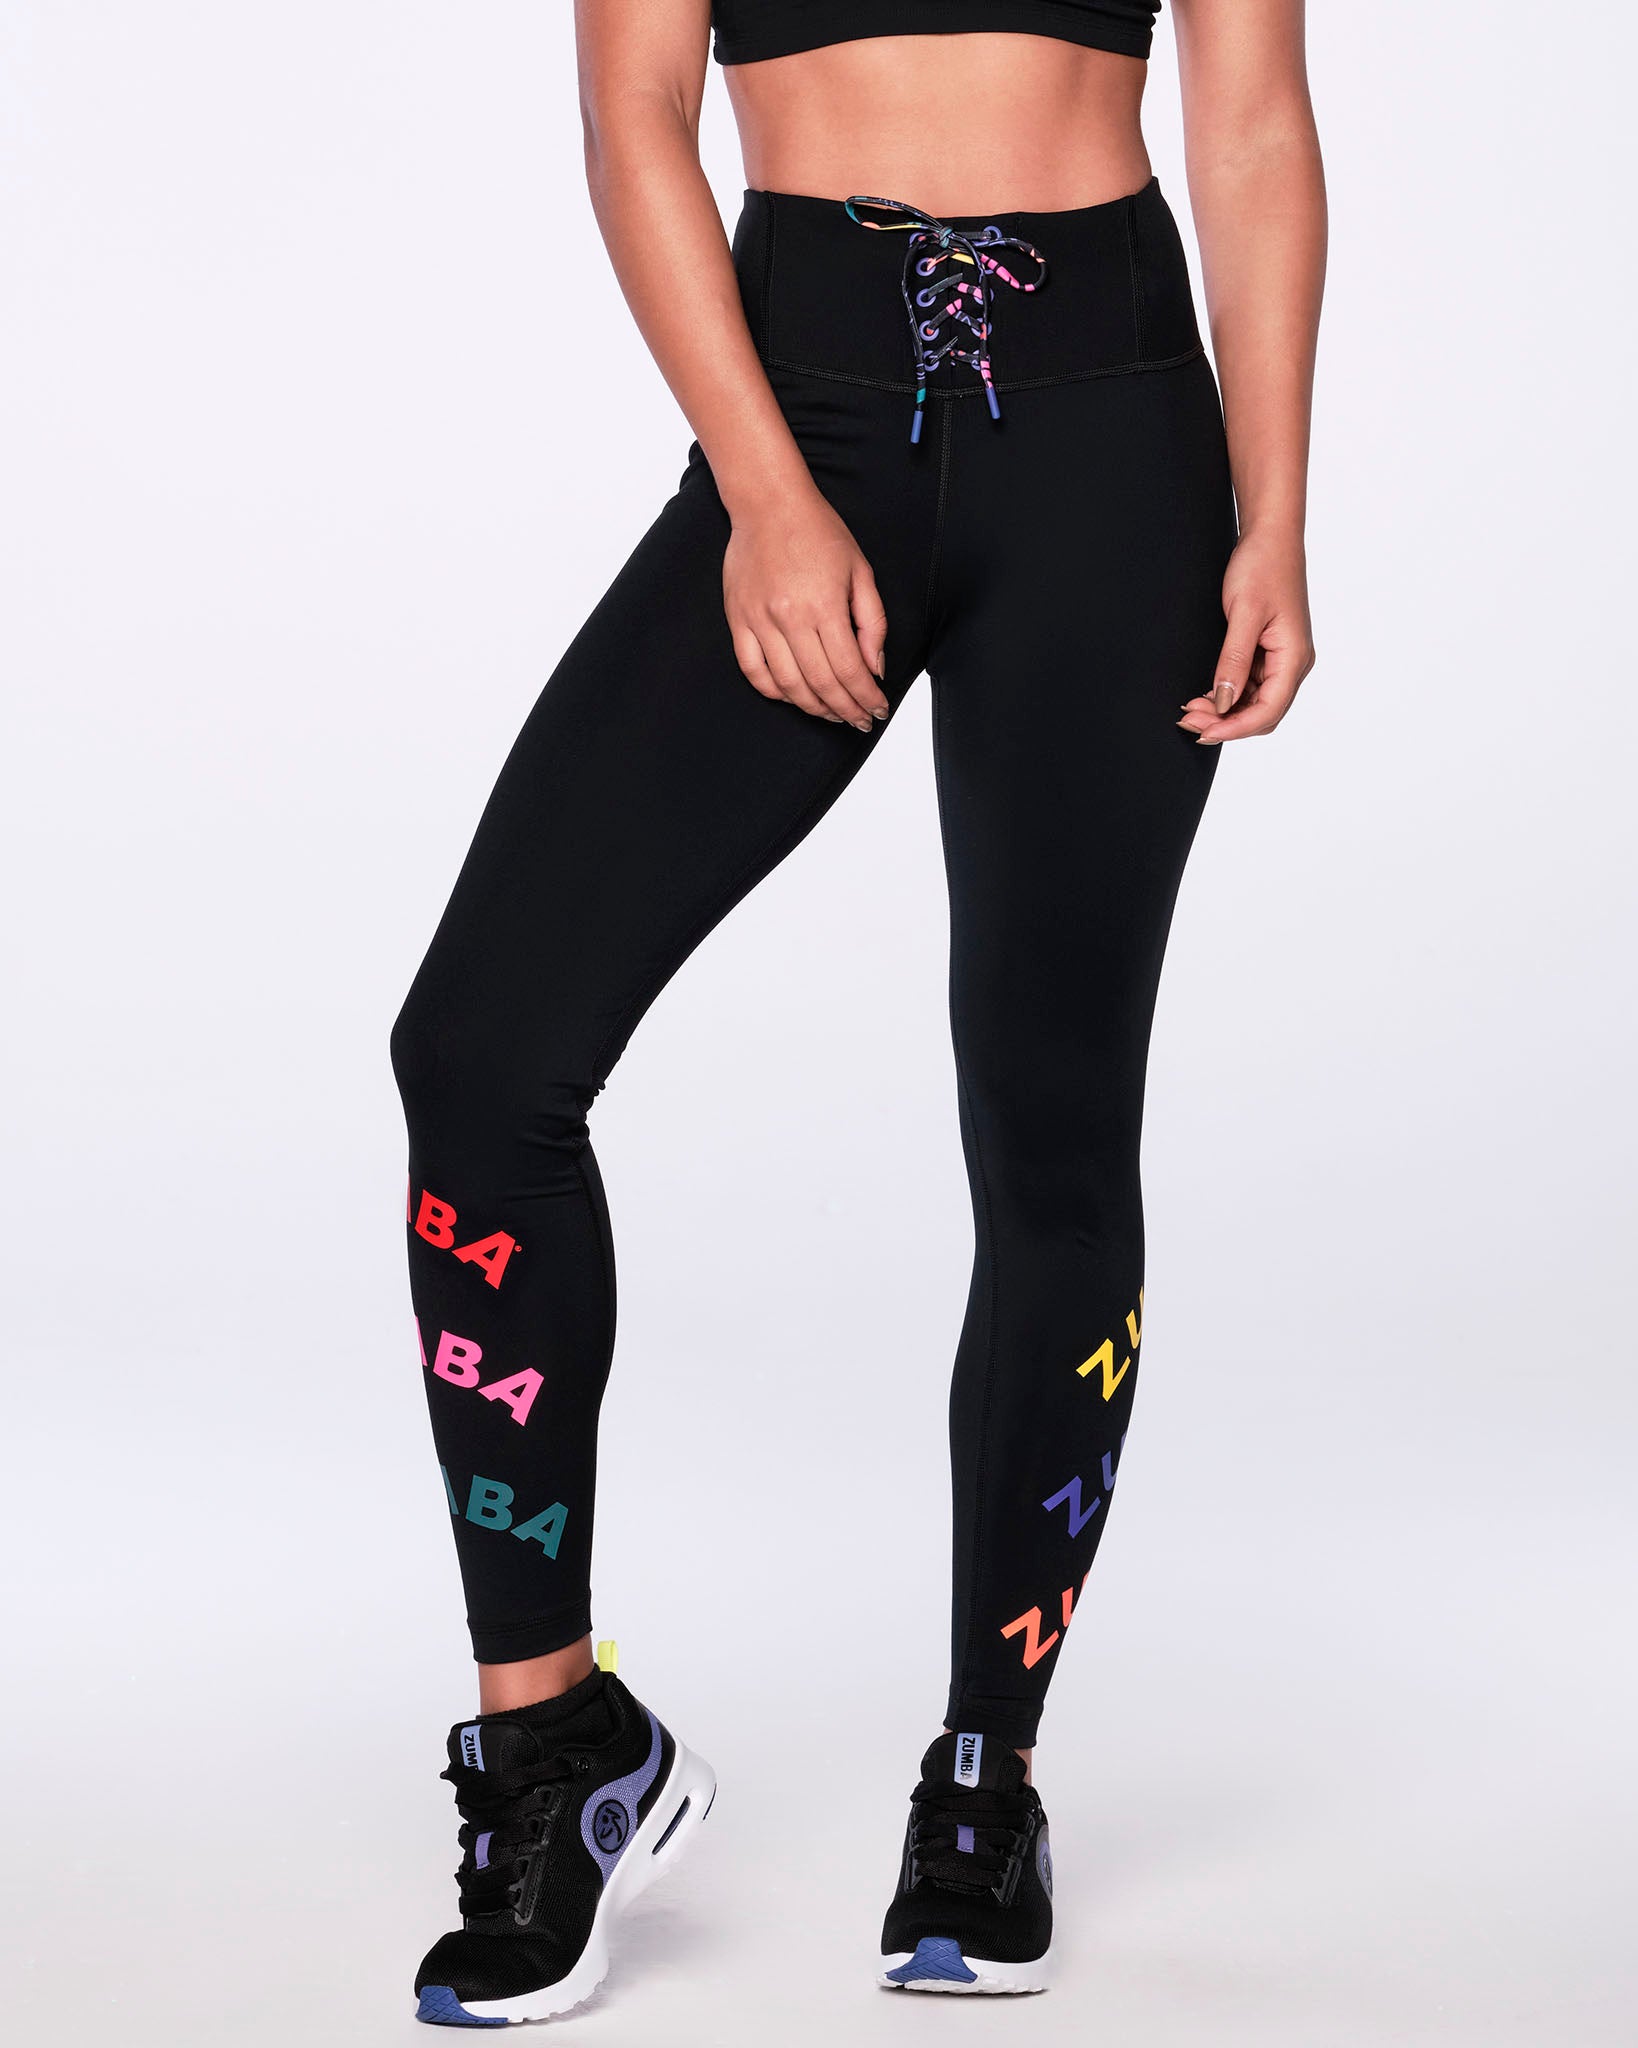 Shop One Women's High-Waisted 7/8 Lace-Up Leggings